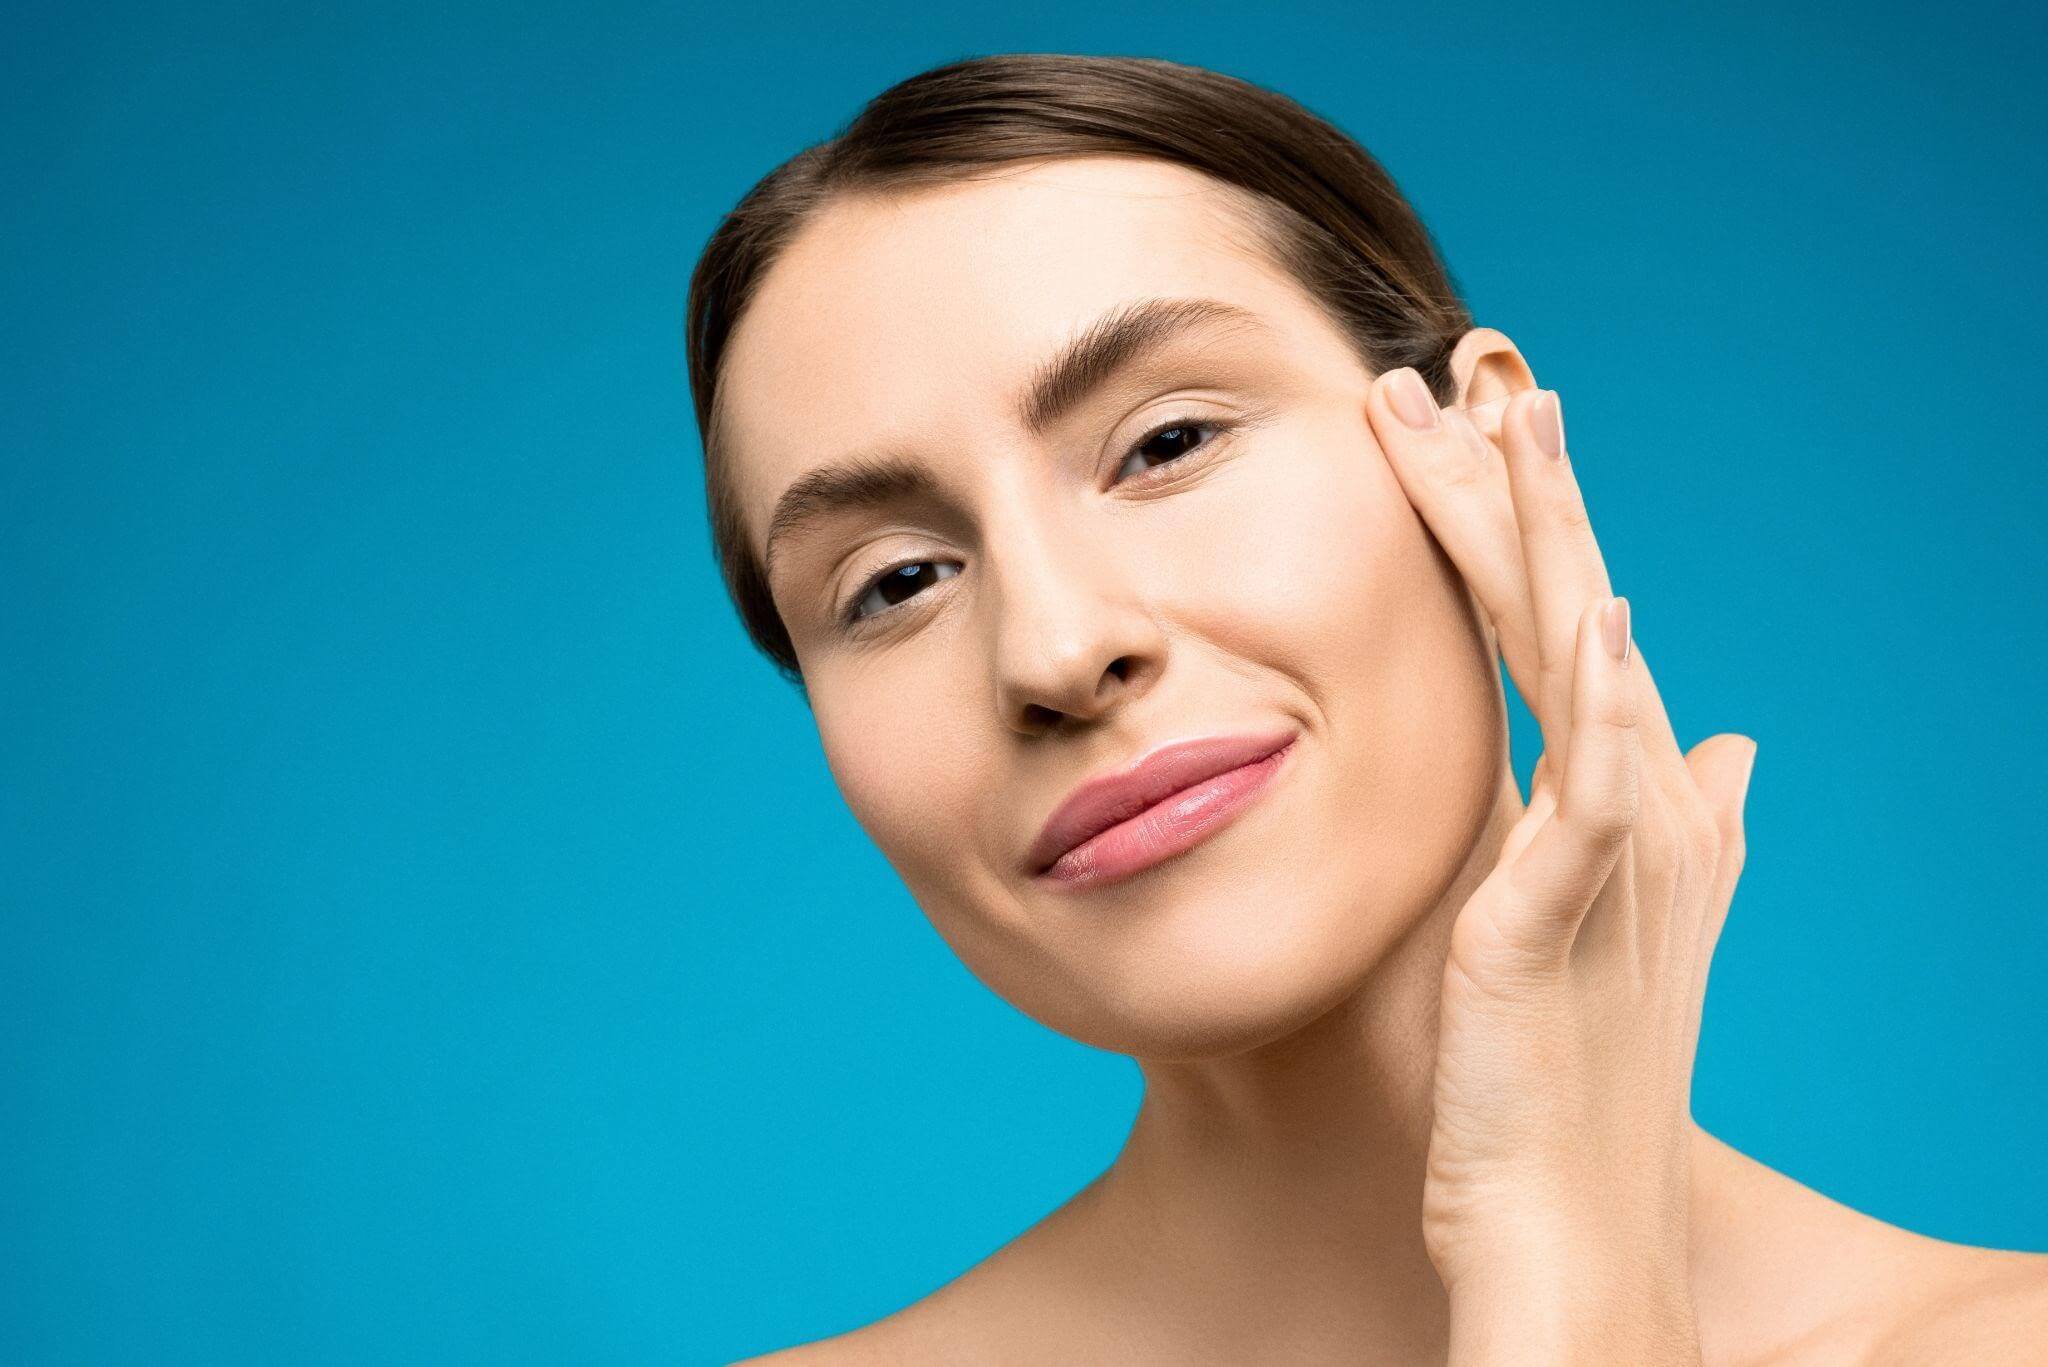 How to Find the Best Nose Surgeon Near You